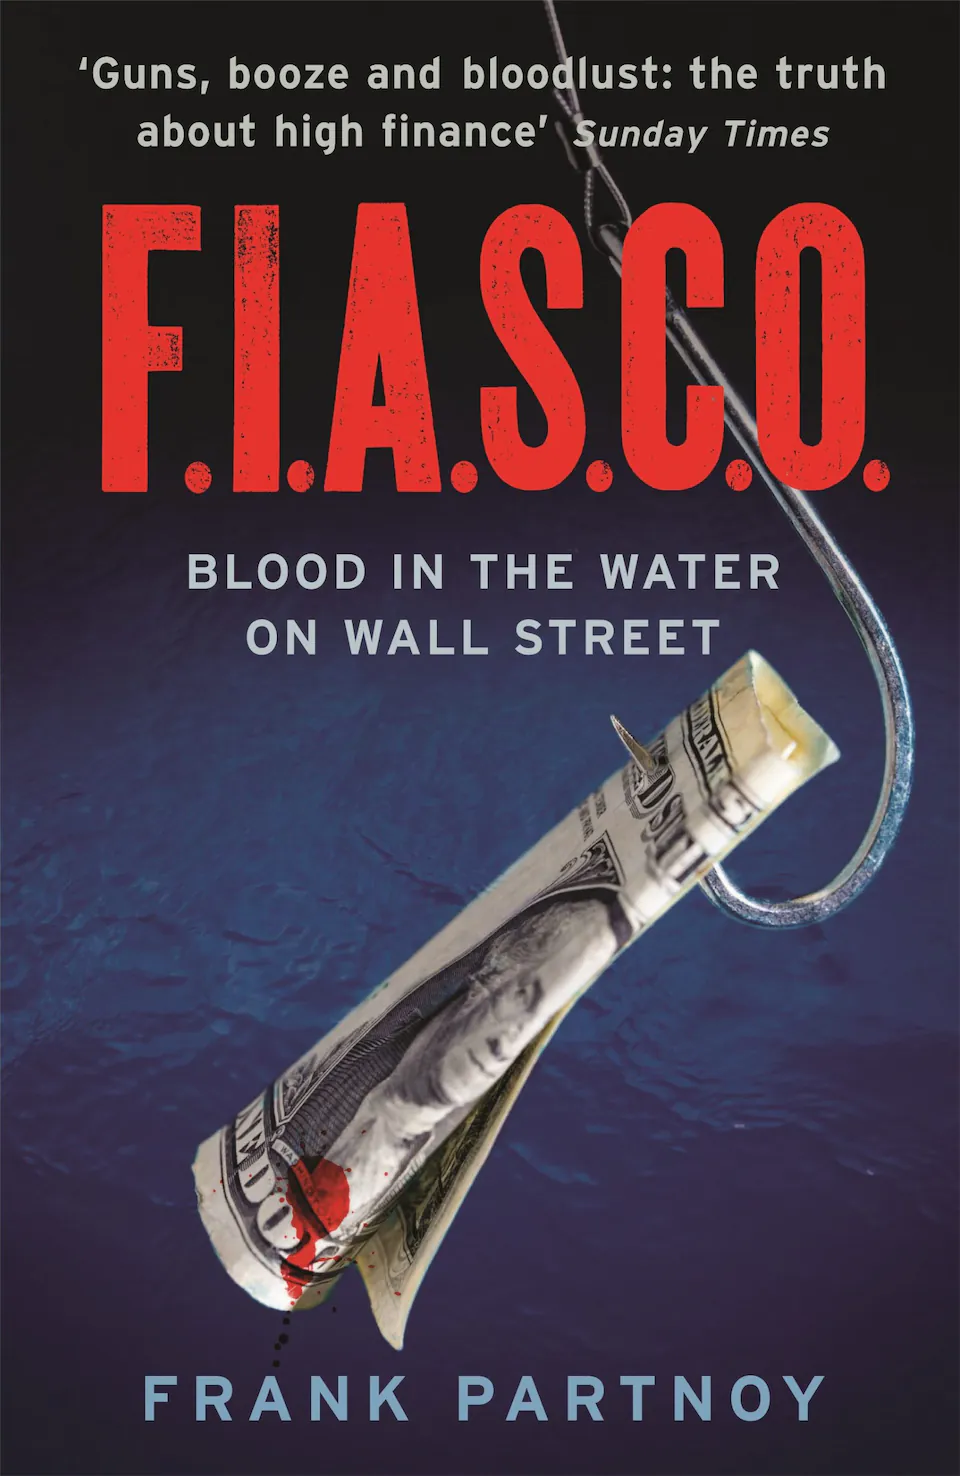 FIASCO: Blood in the Water on Wall Street by Frank Partnoy